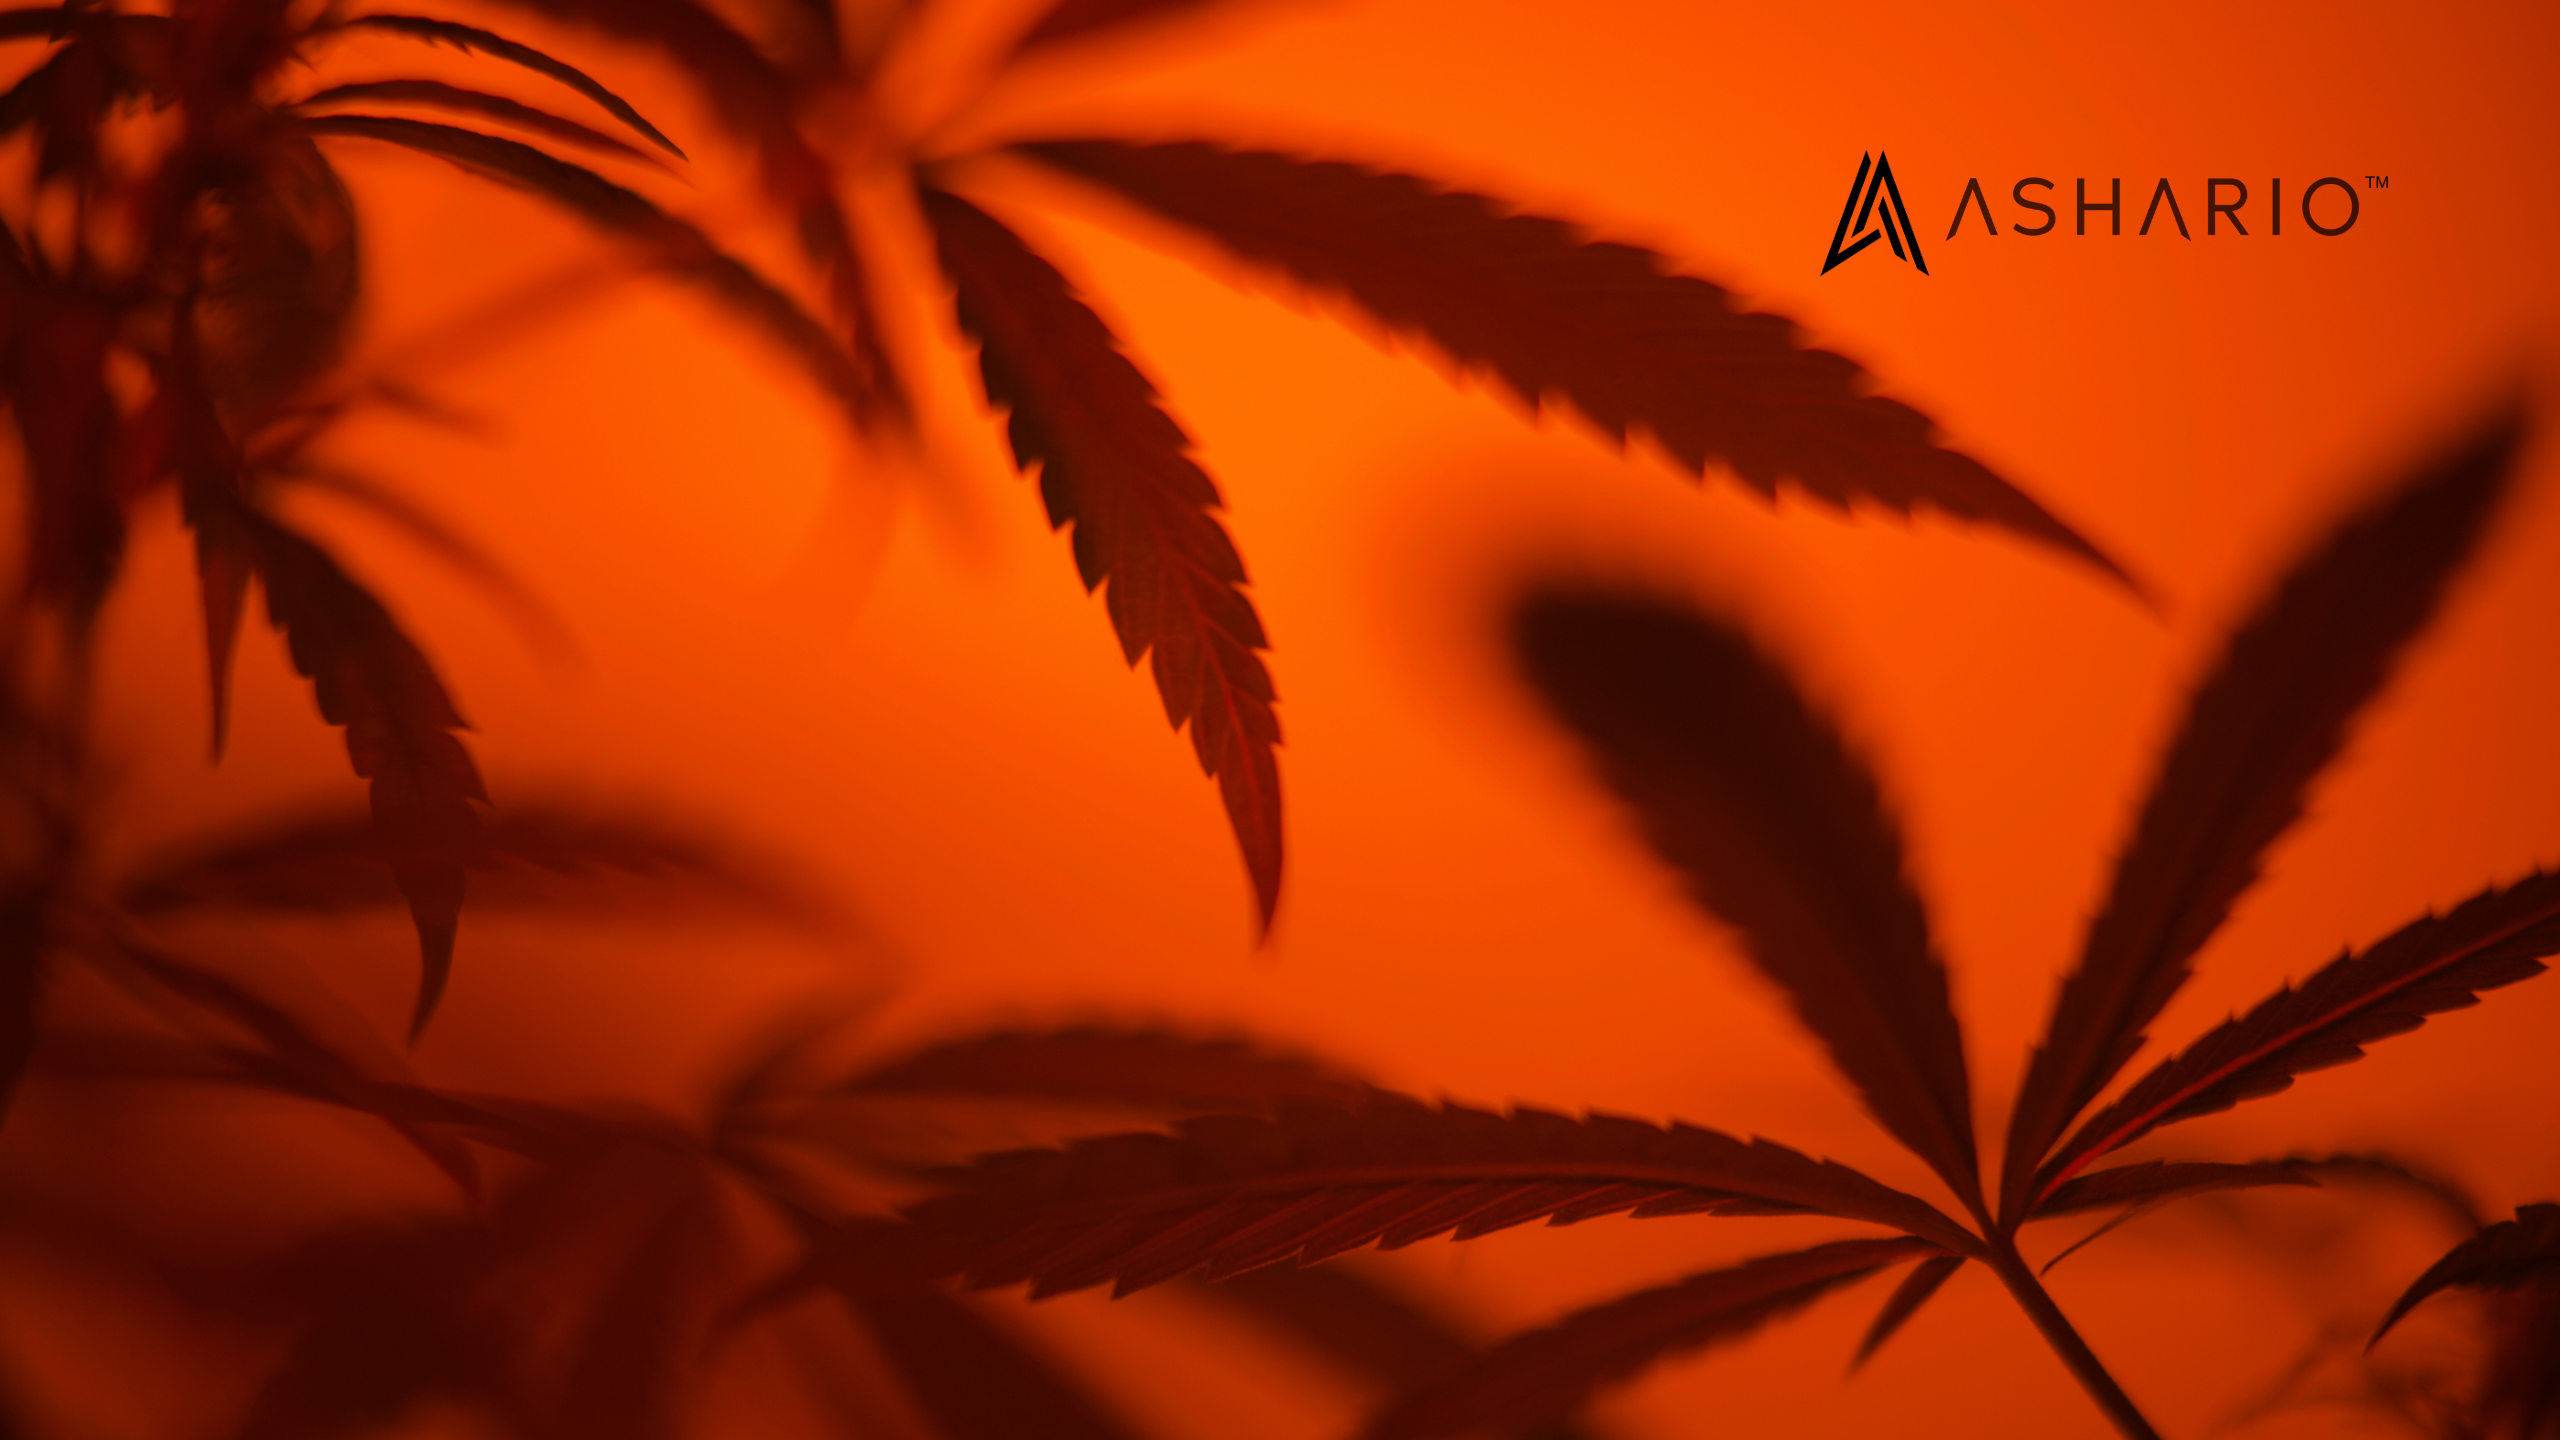 Experience the pinnacle of craft cannabis in North York with Ashario Cannabis.